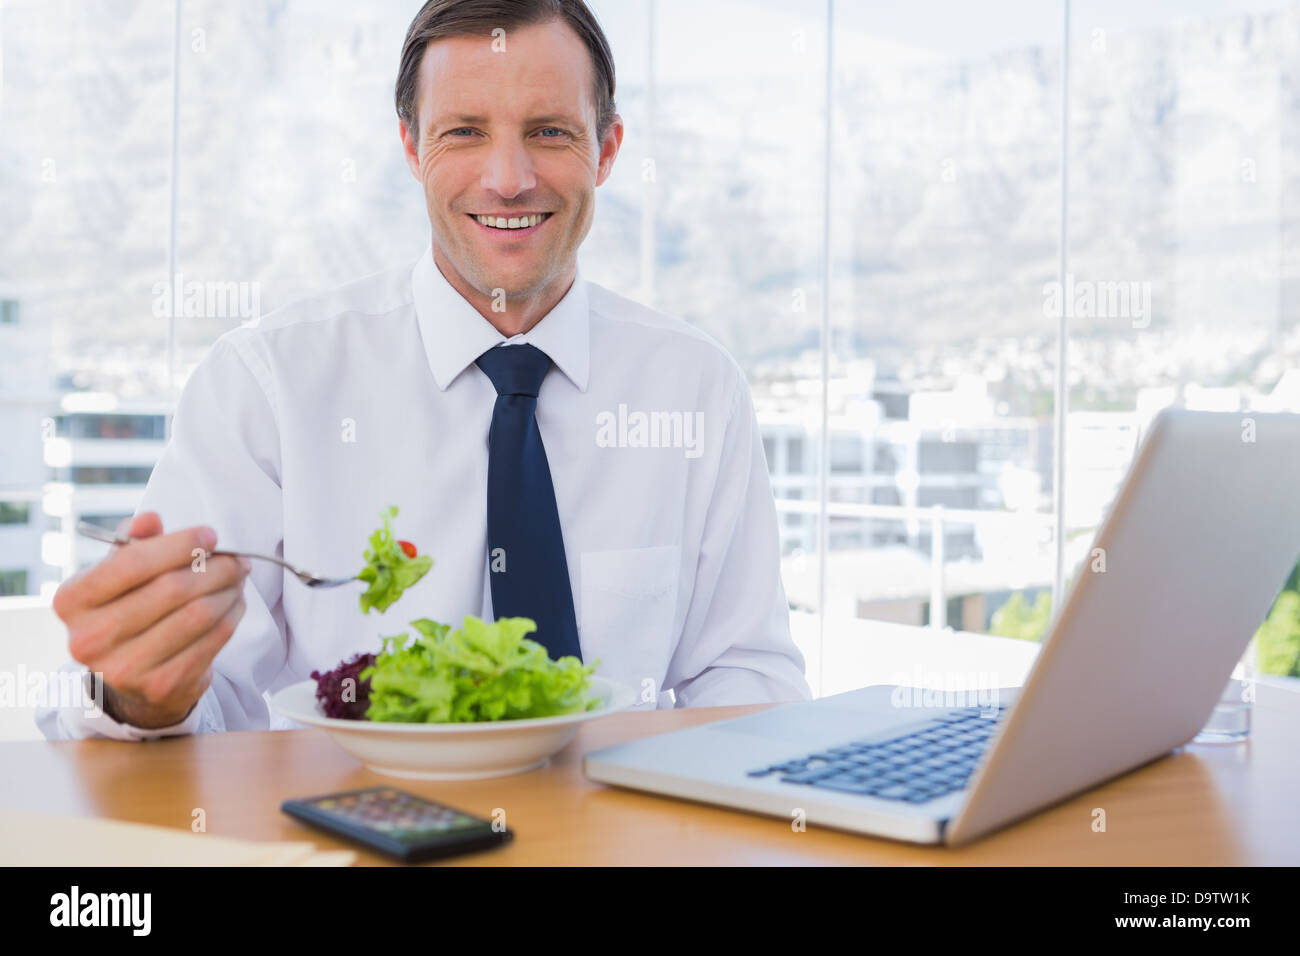 Happy businessman eating a salad on his desk Stock Photo